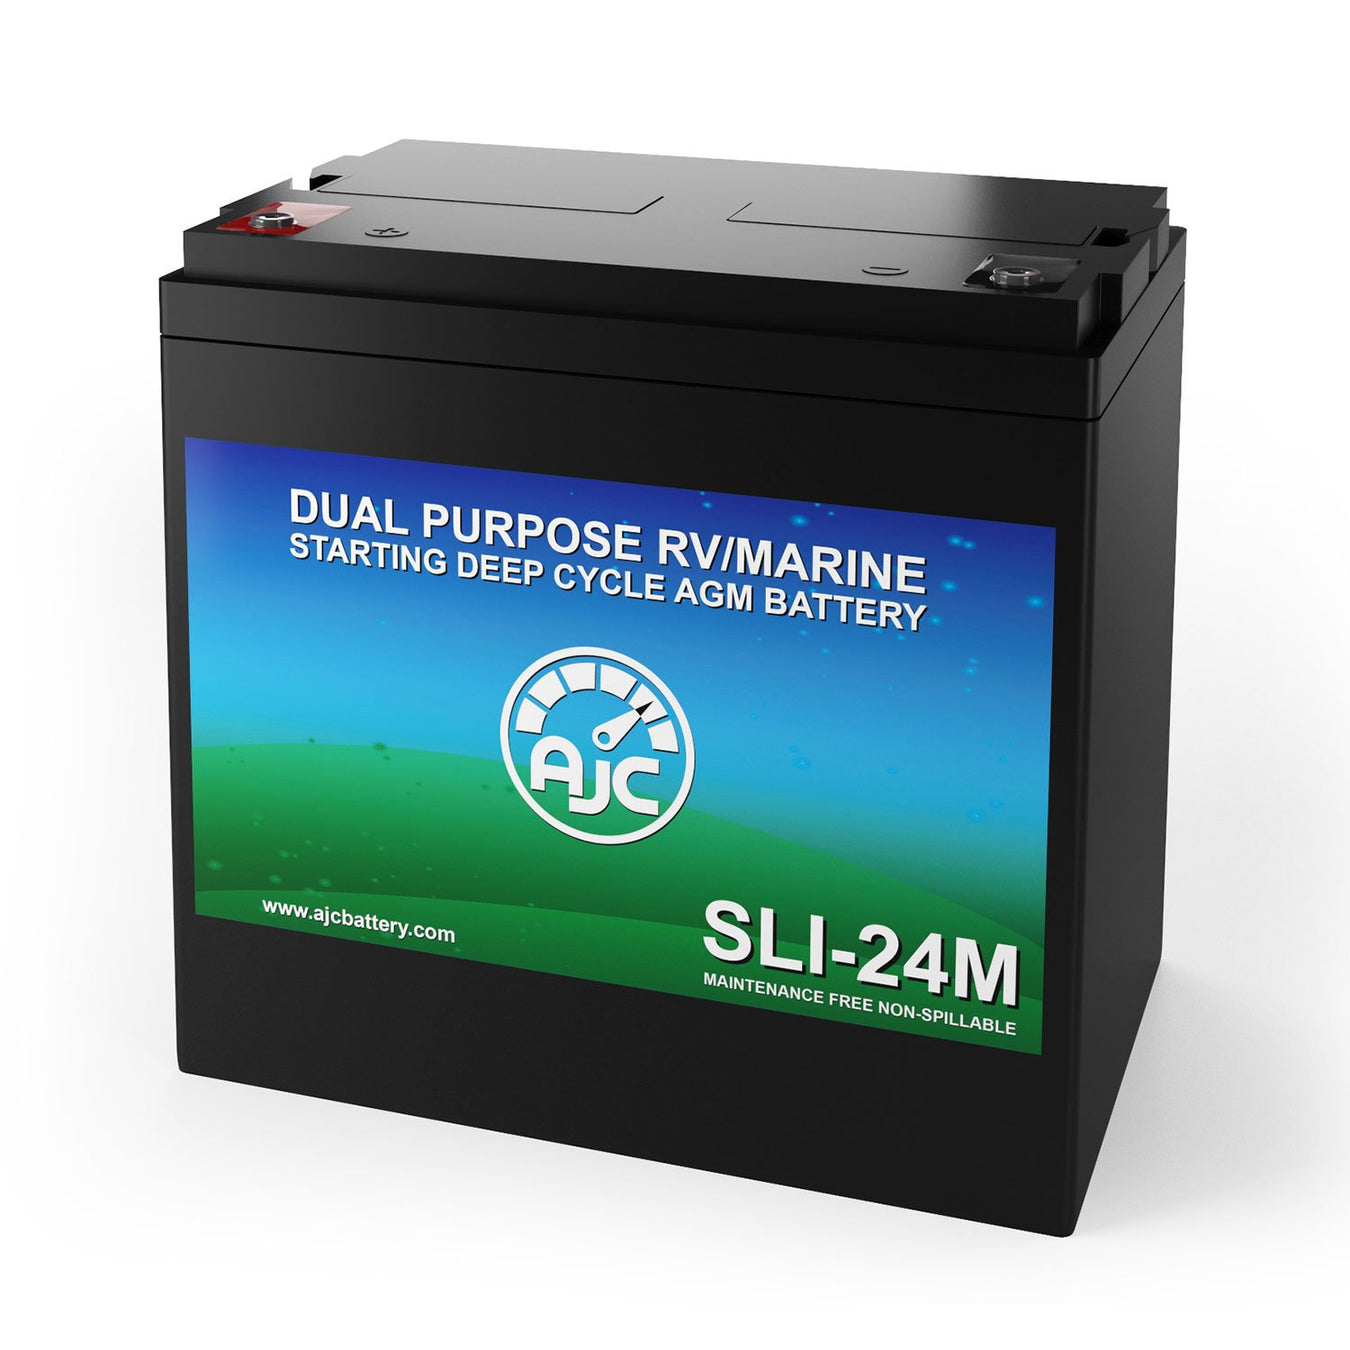 Dual Purpose Starting and Deep Cycle Marine and Boat Batteries